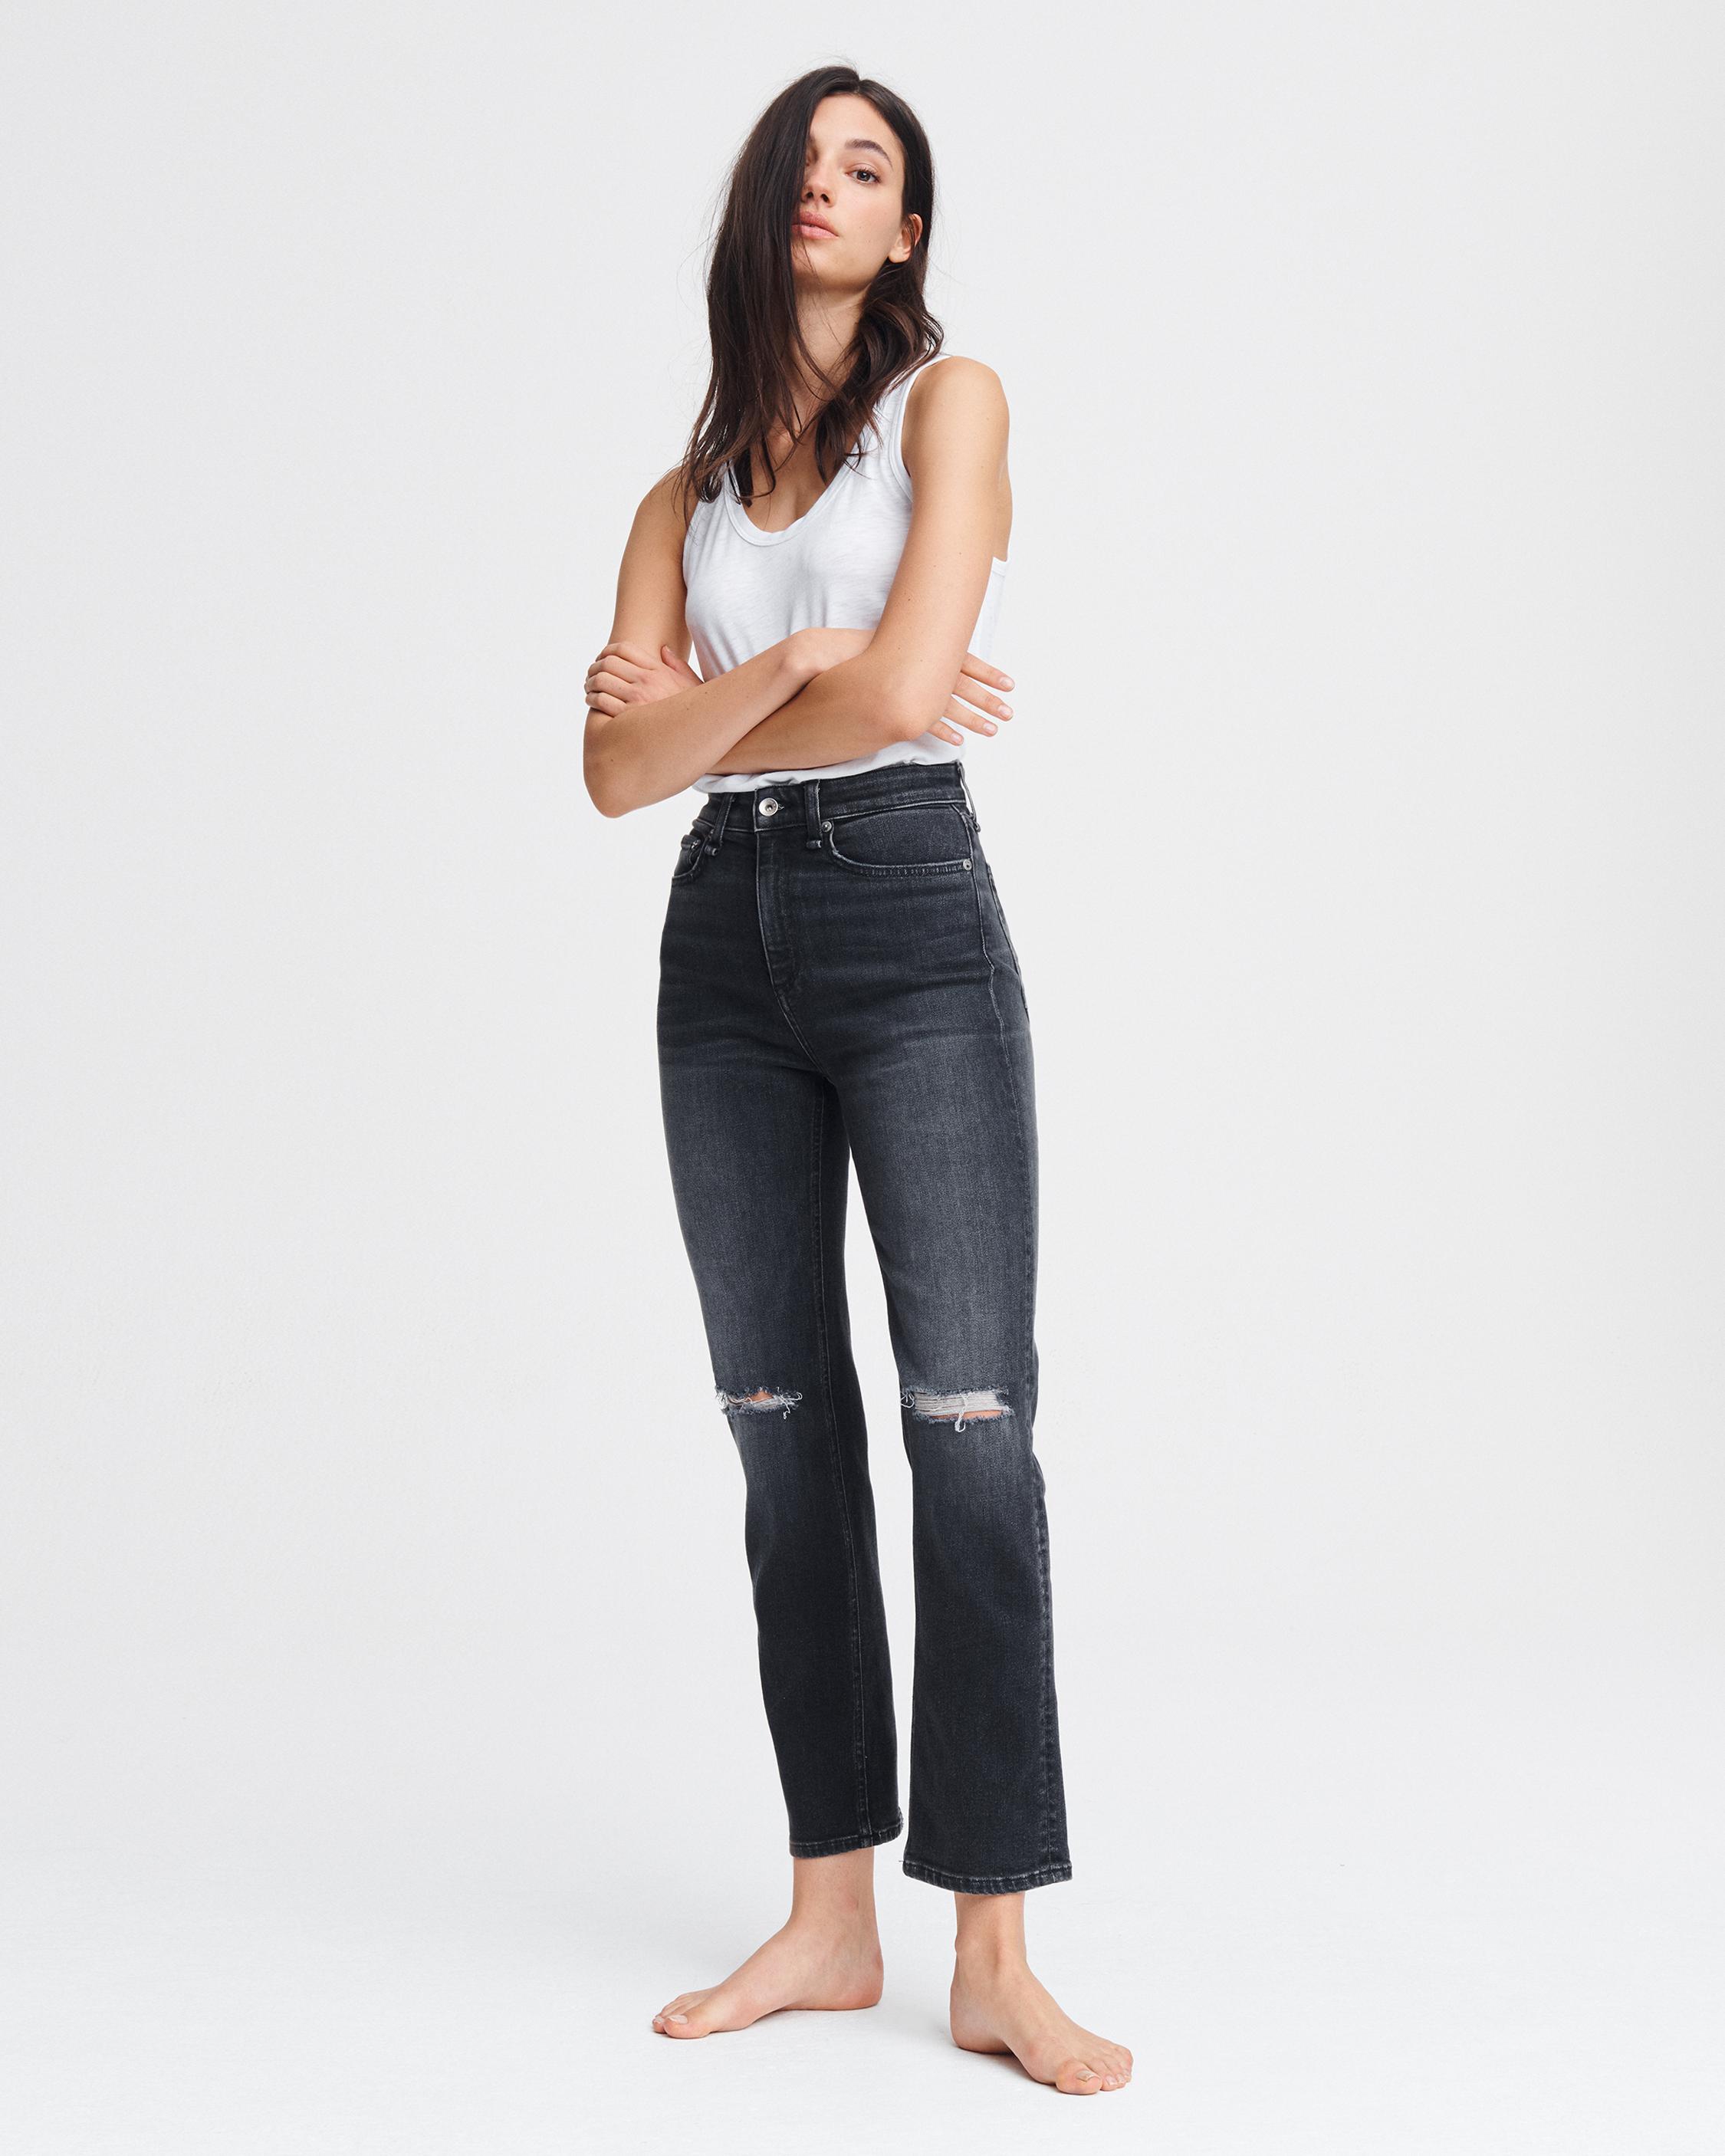 Rag & Bone Nina High Rise Pull on Pants with Ankle Slit. NWT. Size XS.